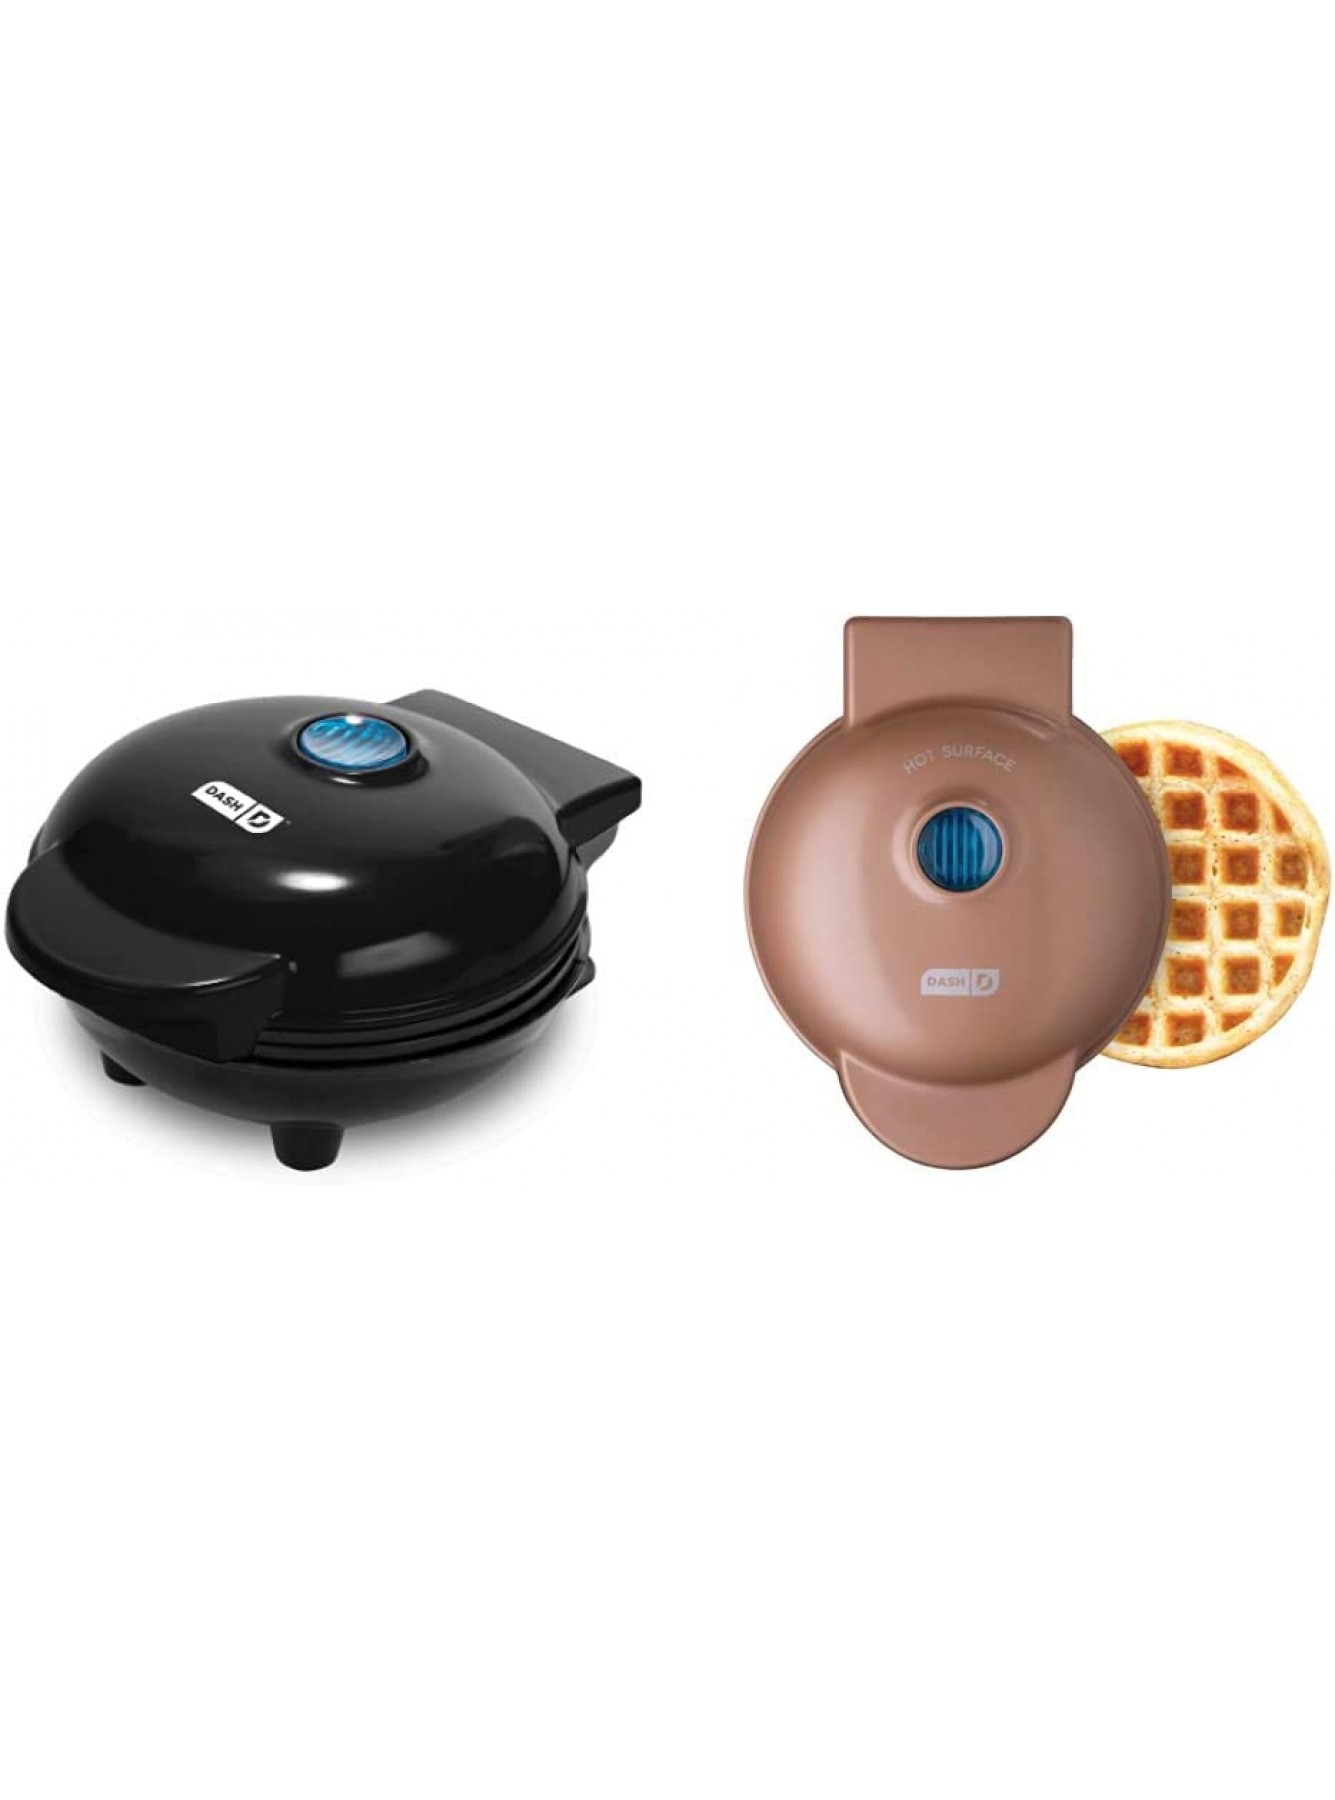 Dash DMS001BK Mini Round Electric Griddle Machine Black & DMW001CU Machine for Individual Paninis Hash Browns & other Mini waffle maker 4 inch Copper B091FKYGGK